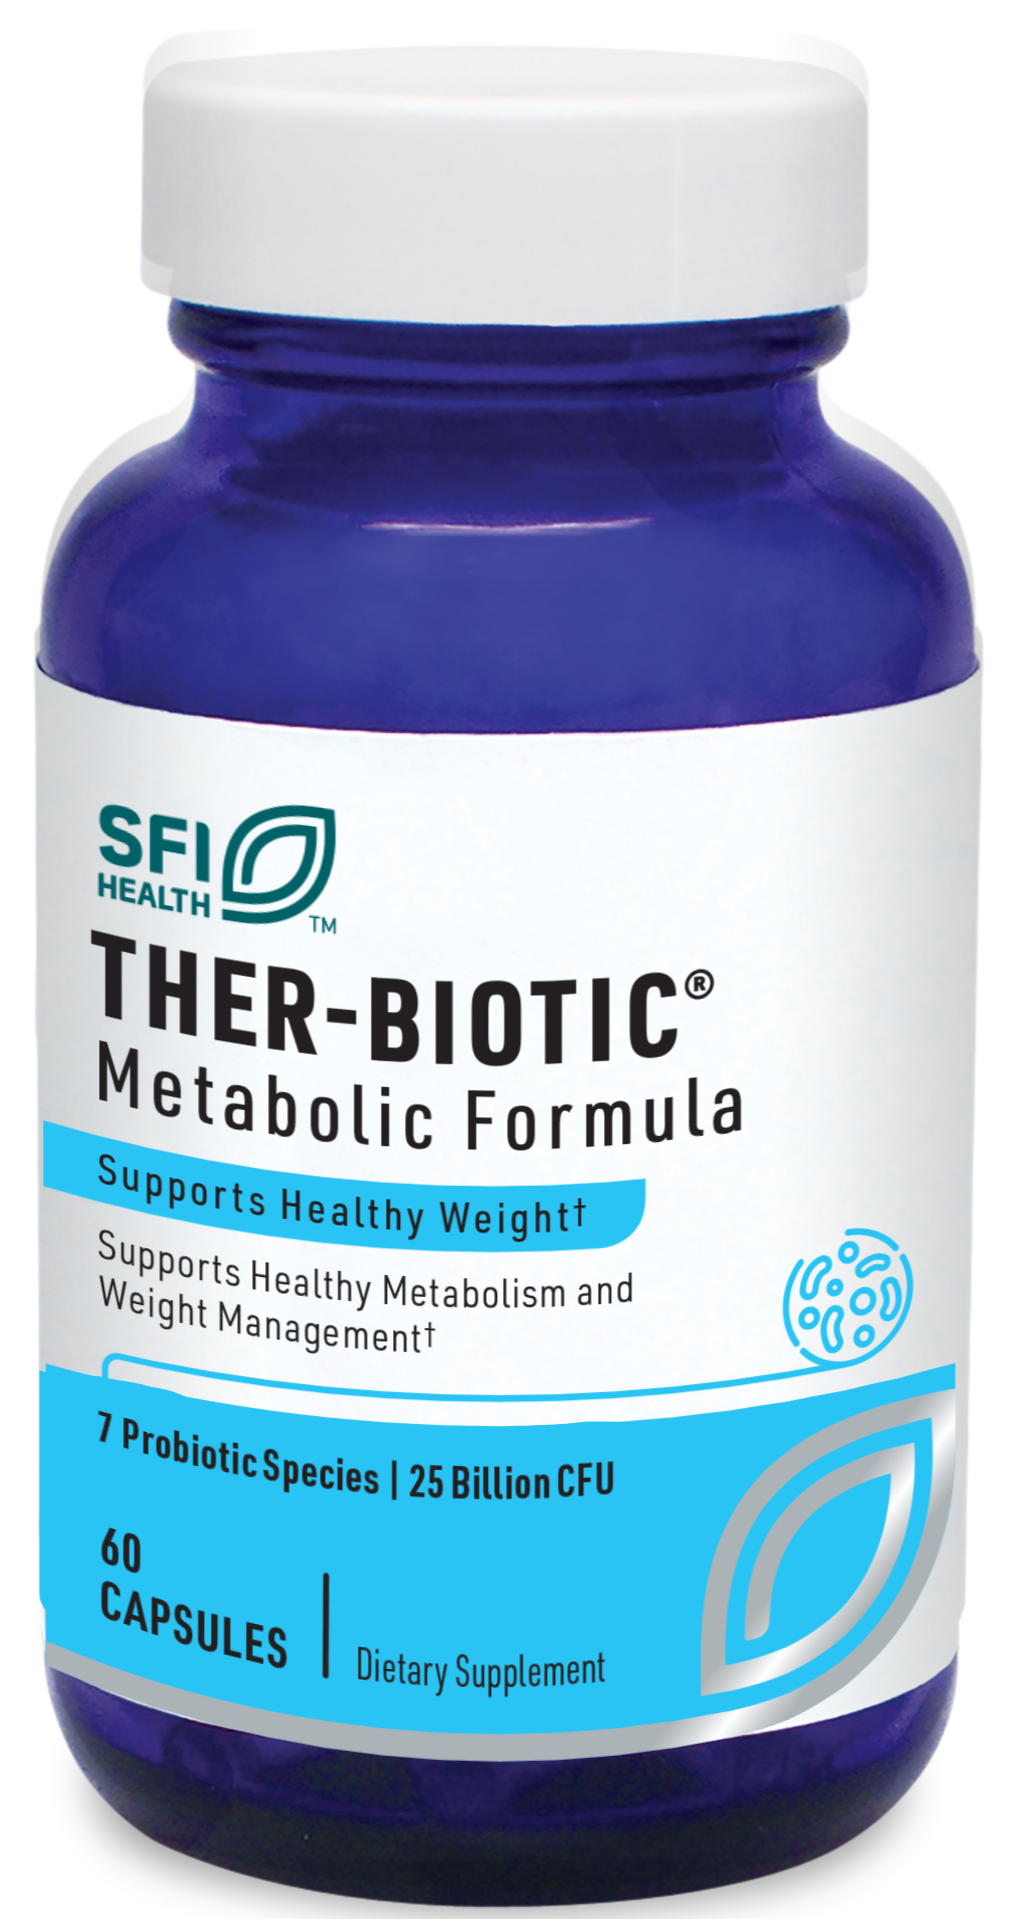 Ther-Biotic Metabolic